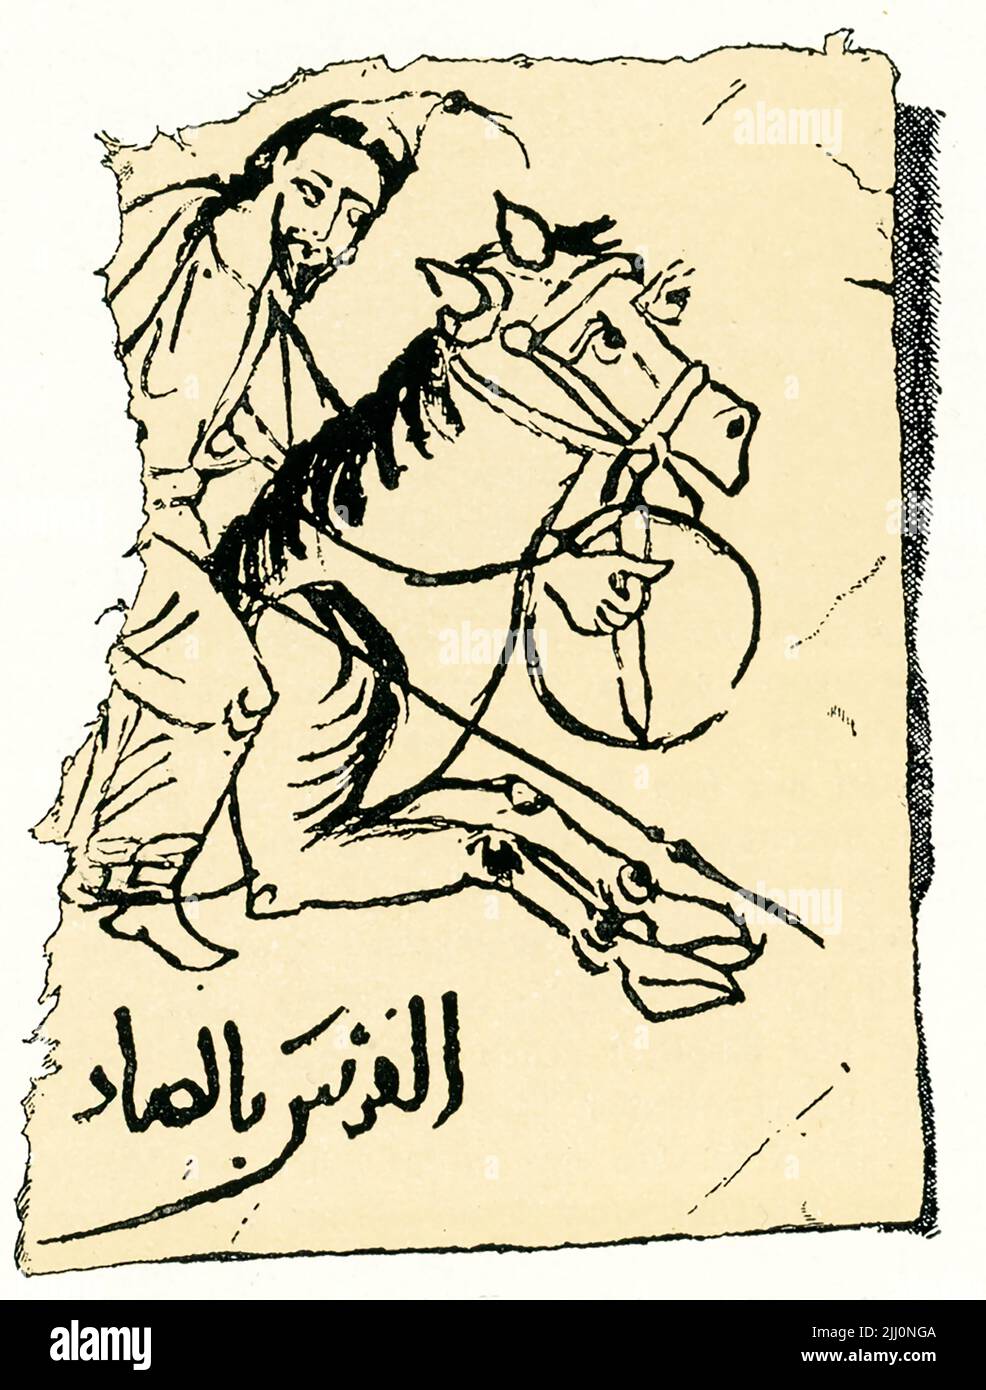 This 1910 image shows an Arab horseback rider. It is part of an Arabian papyrus from the 10th century. It is part f the Archduke Rainer’s collection in Vienna, Austria. Stock Photo